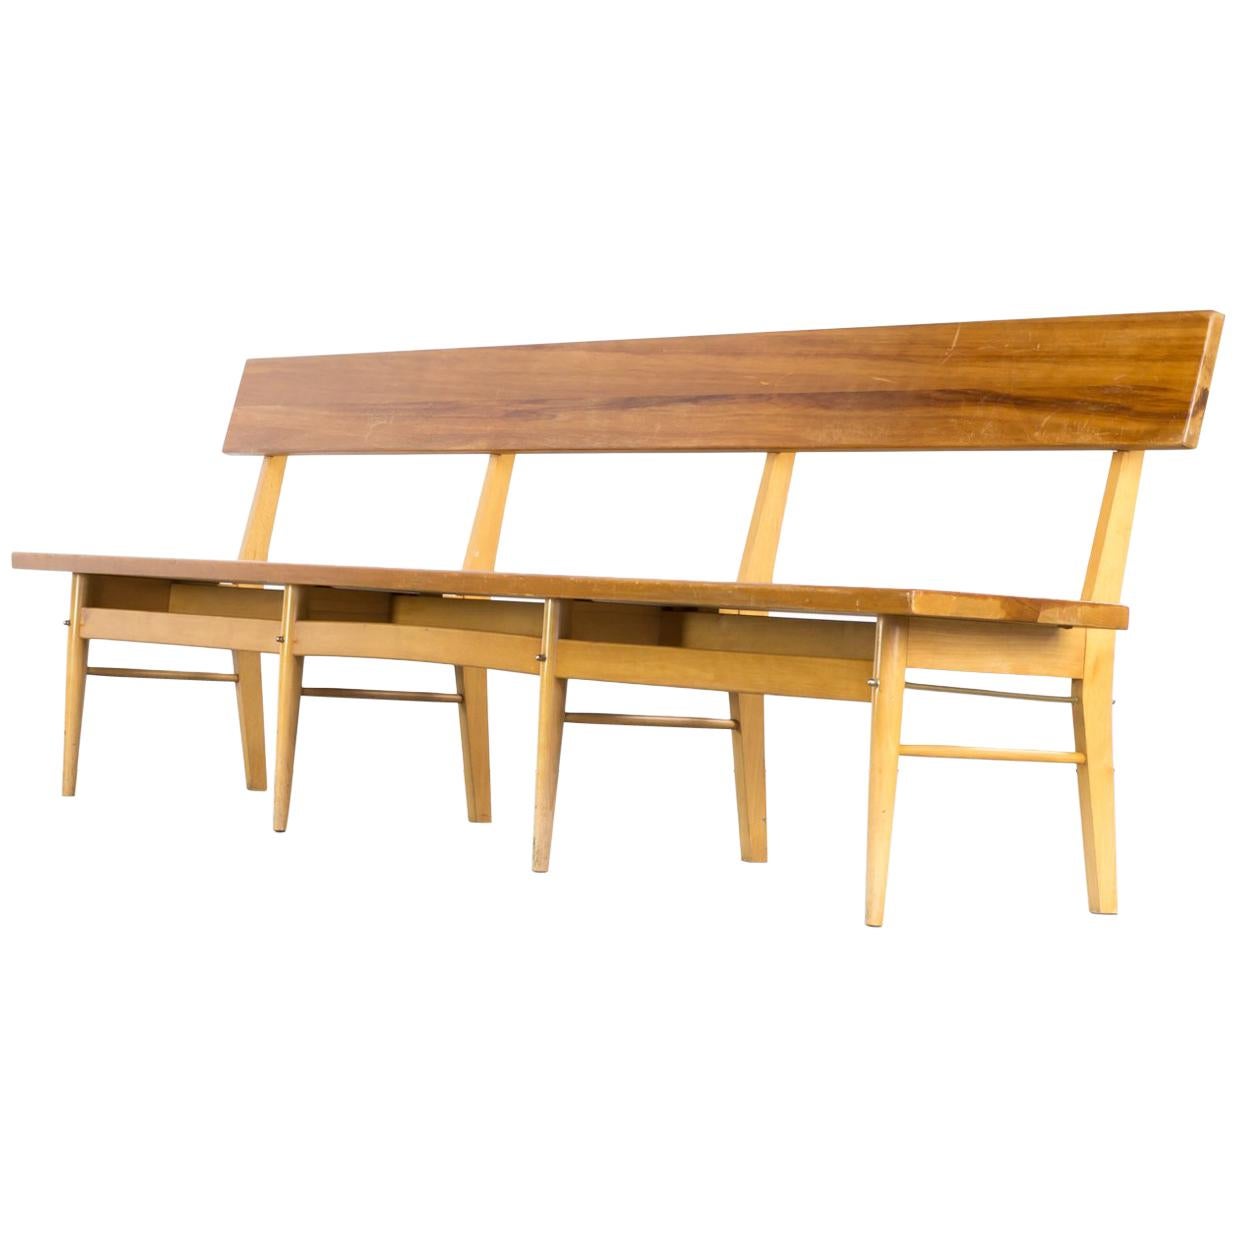 1970s Oak and Birch Long Wooden Bench For Sale